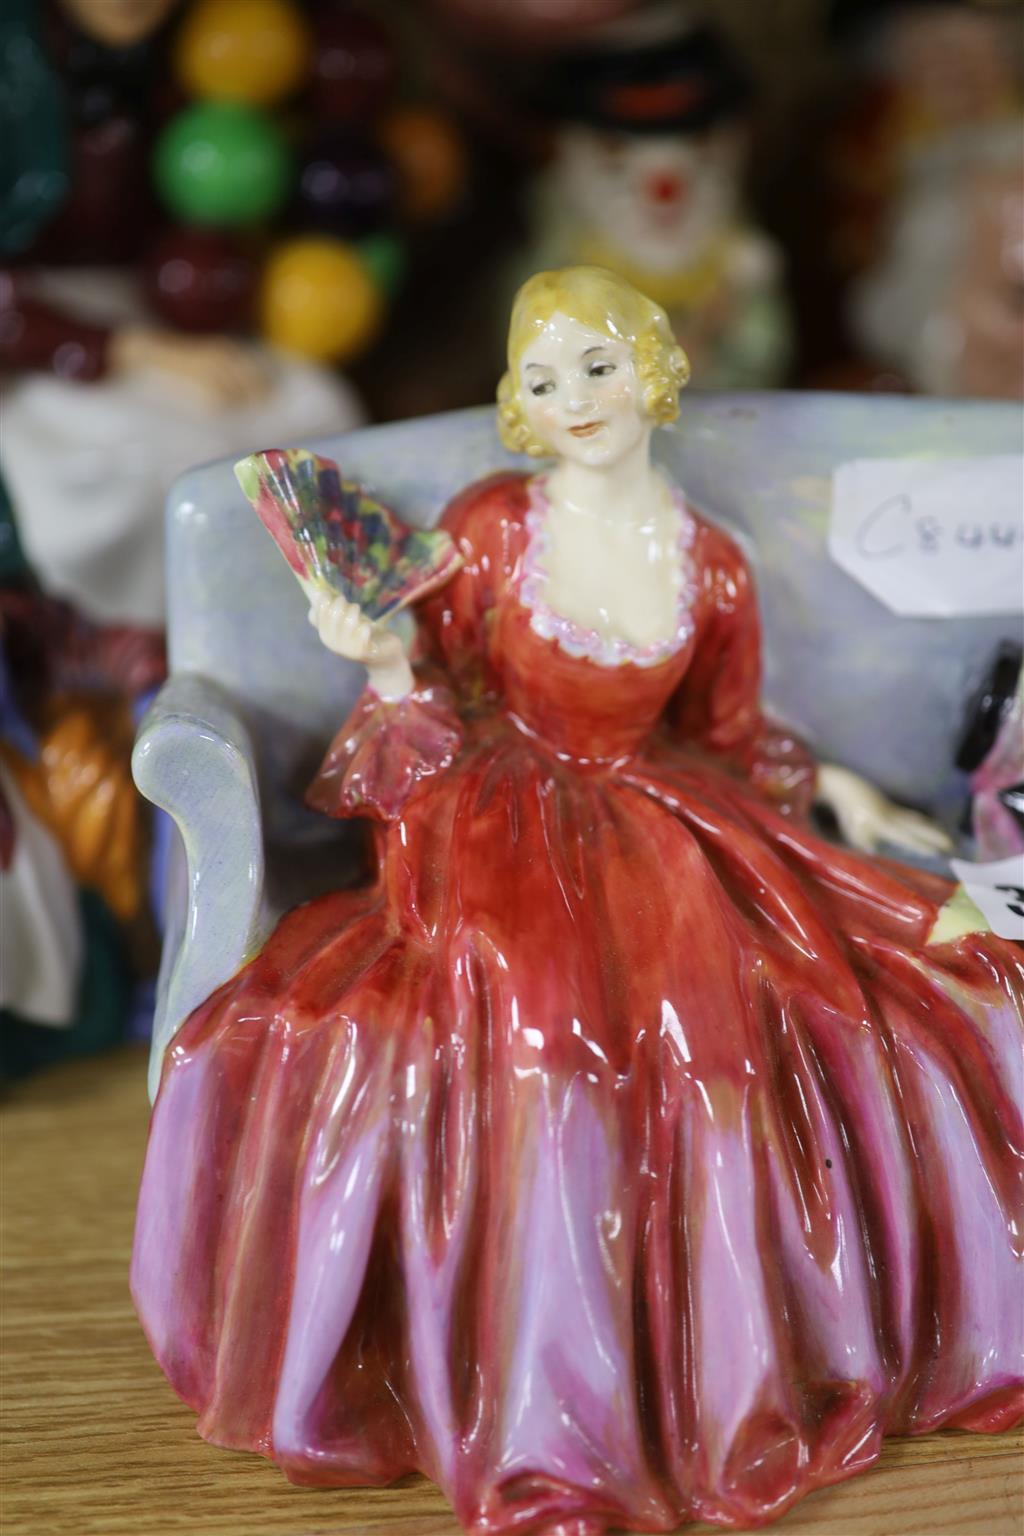 One Royal Doulton balloon seller, three other figurines, plus six character jugs